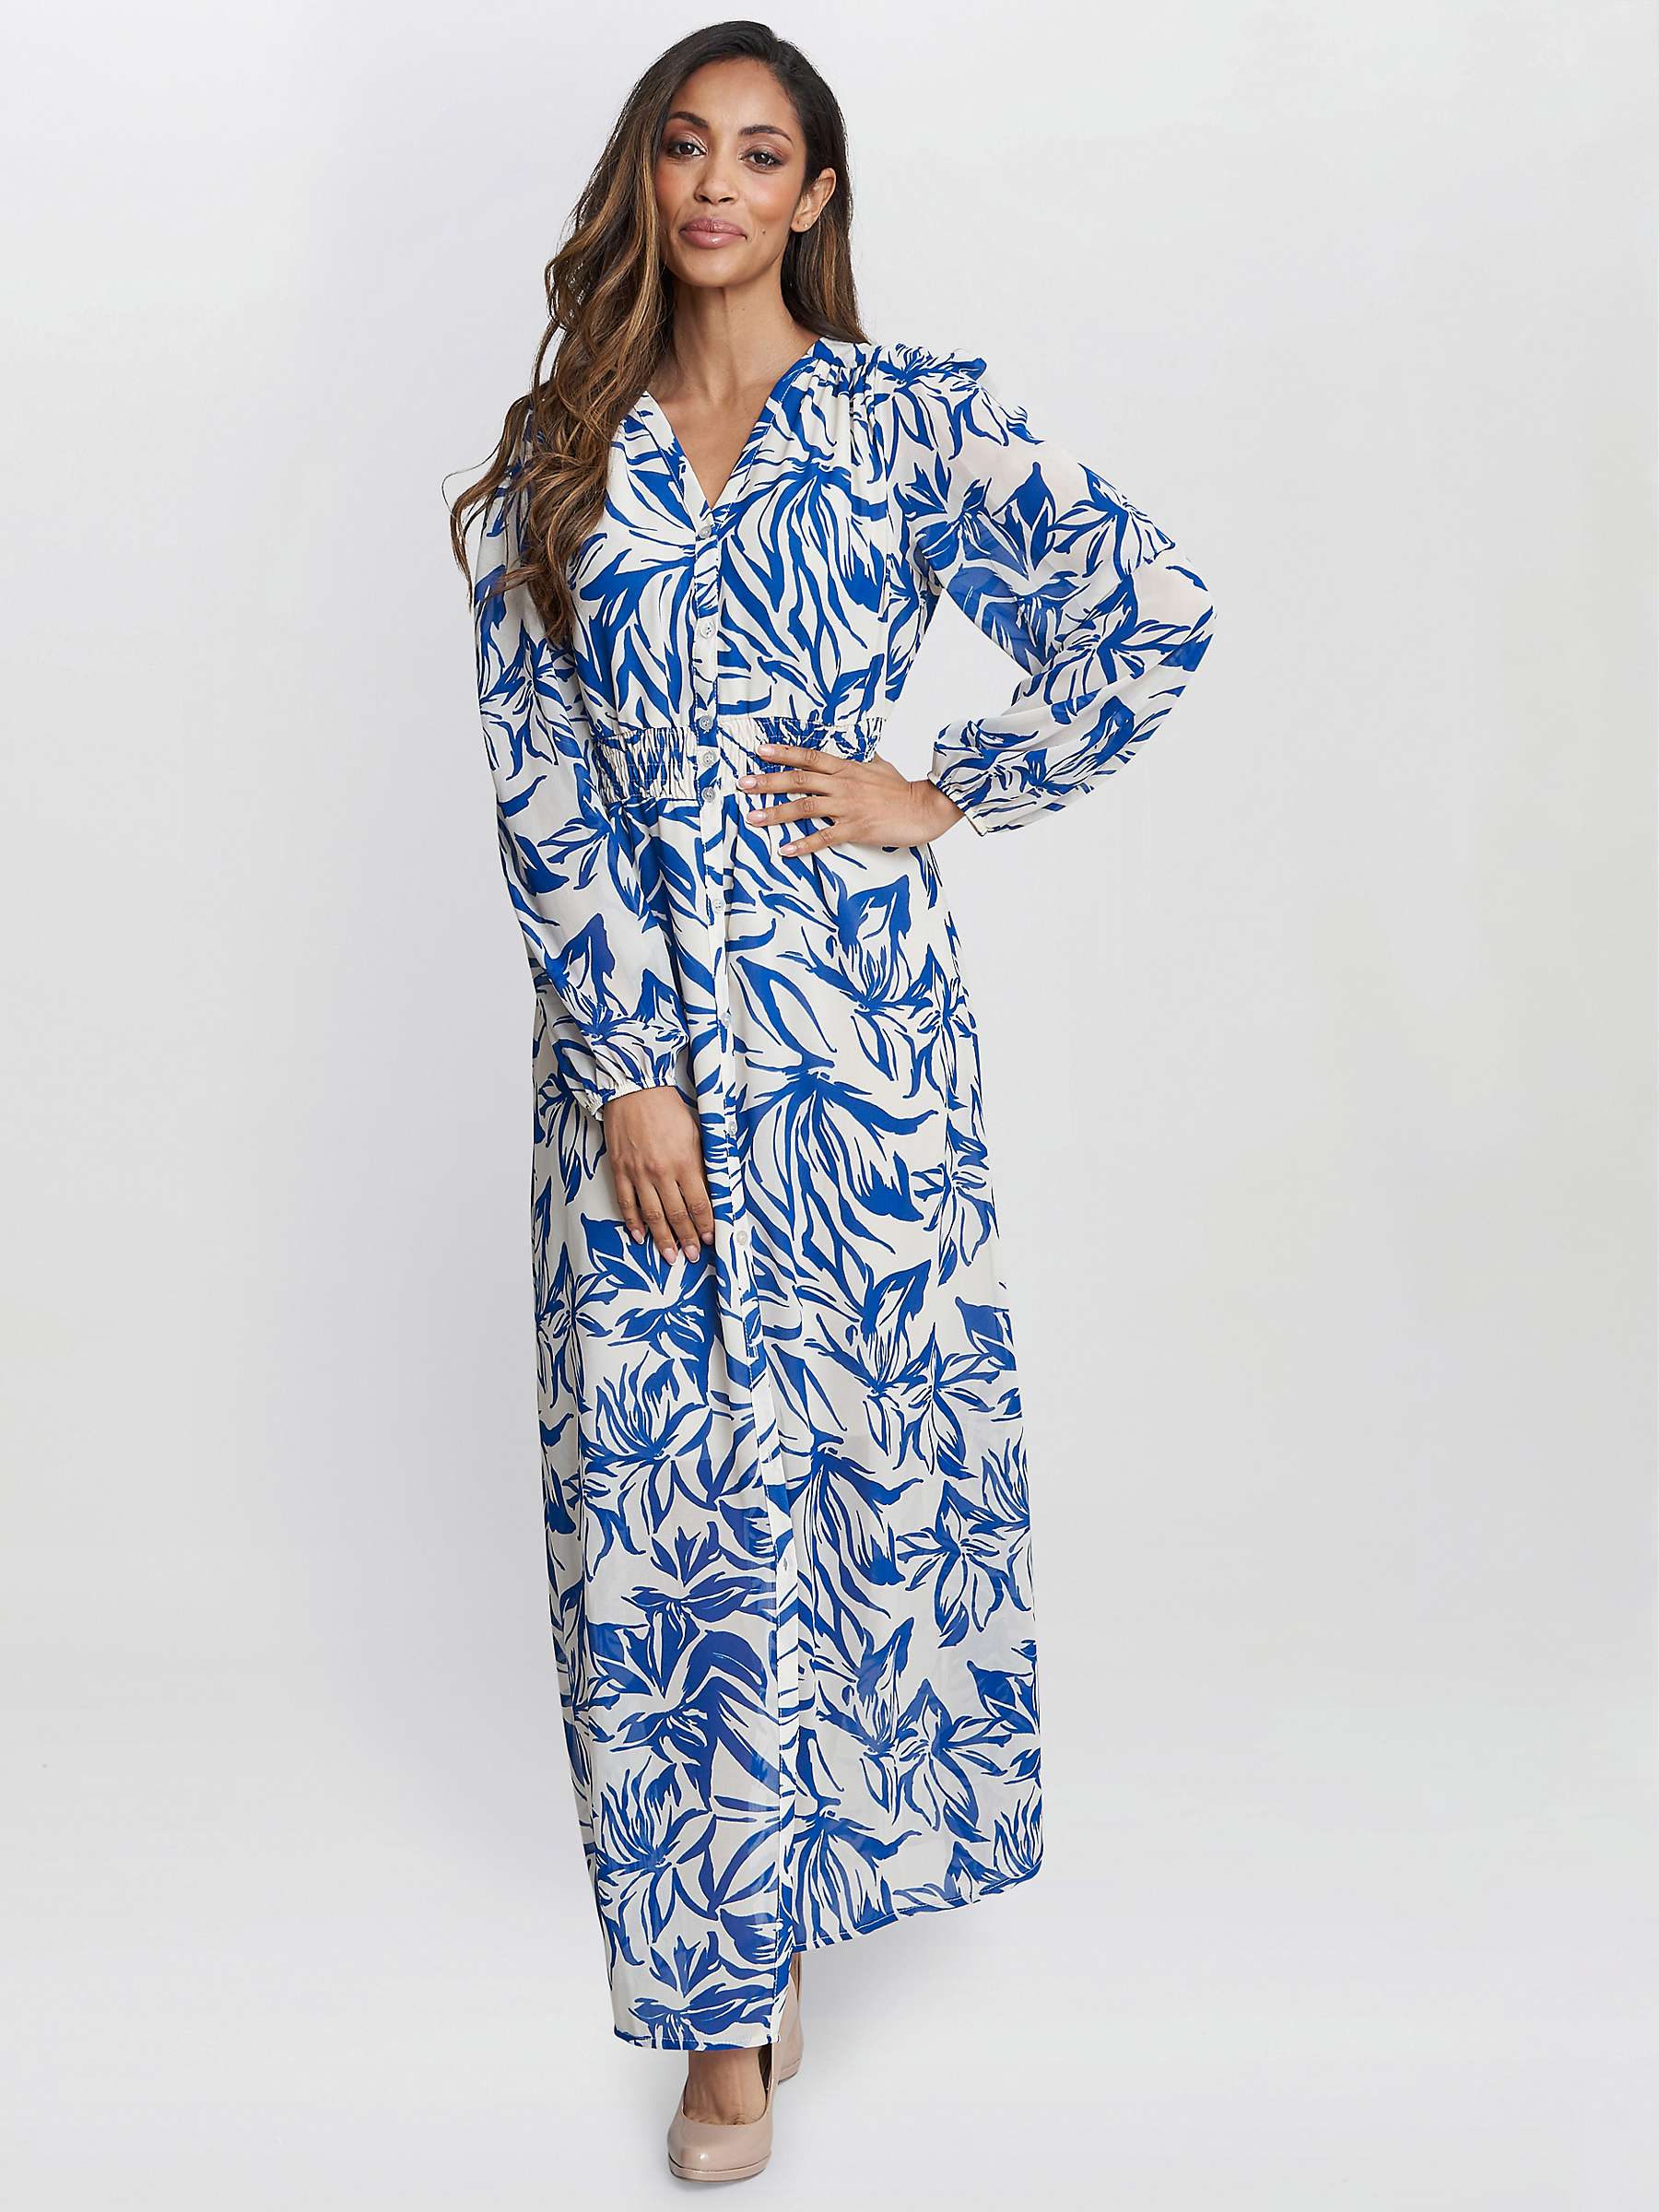 Buy Gina Bacconi Judy Button Front Floral Maxi Dress, Blue/White Online at johnlewis.com